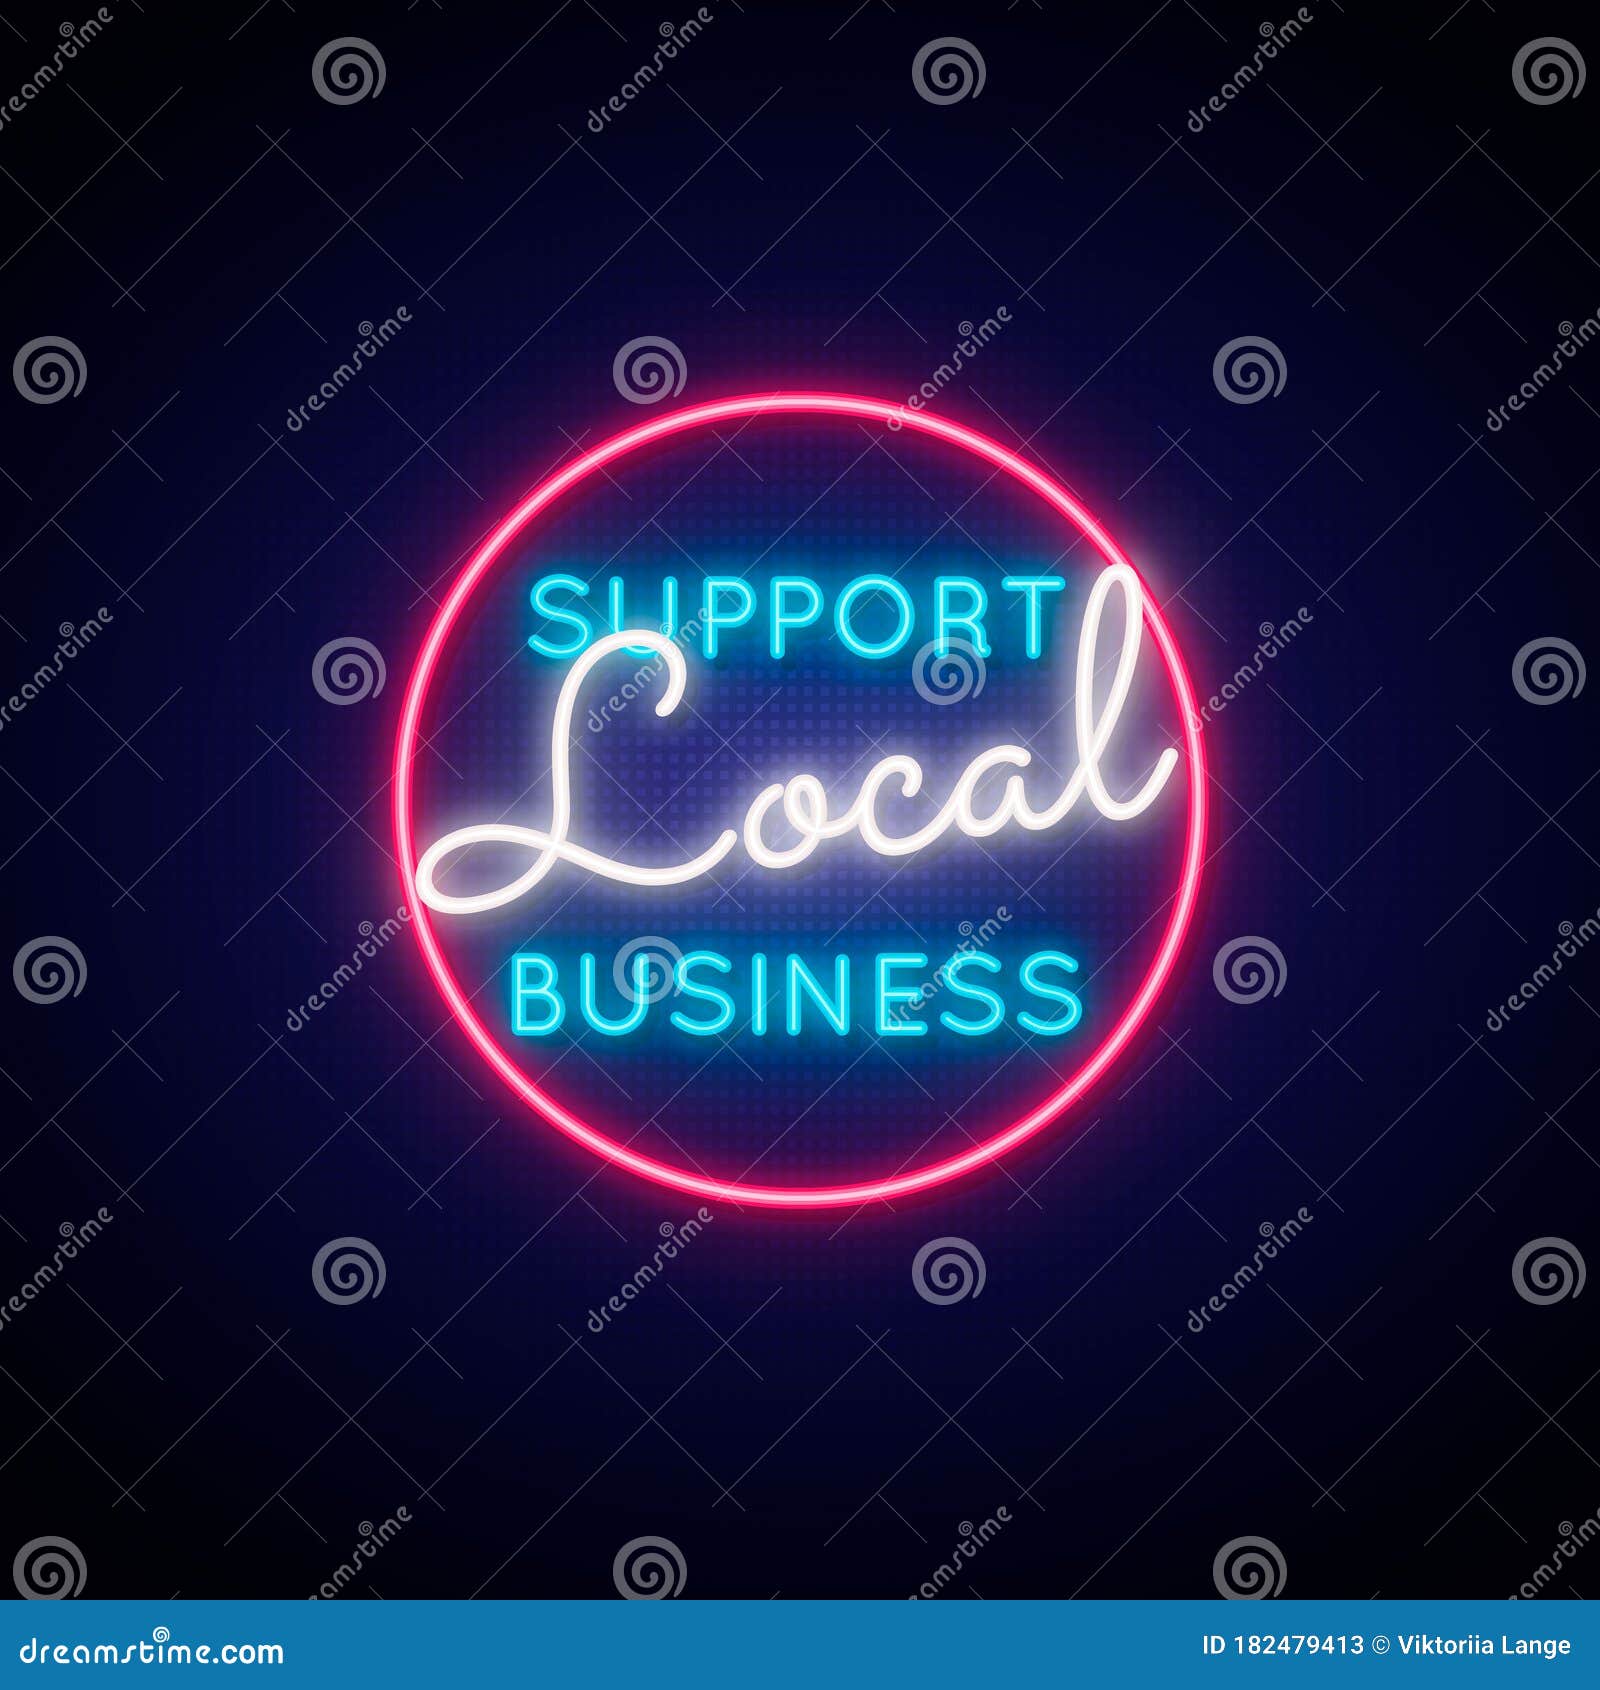 support local business neon sign.